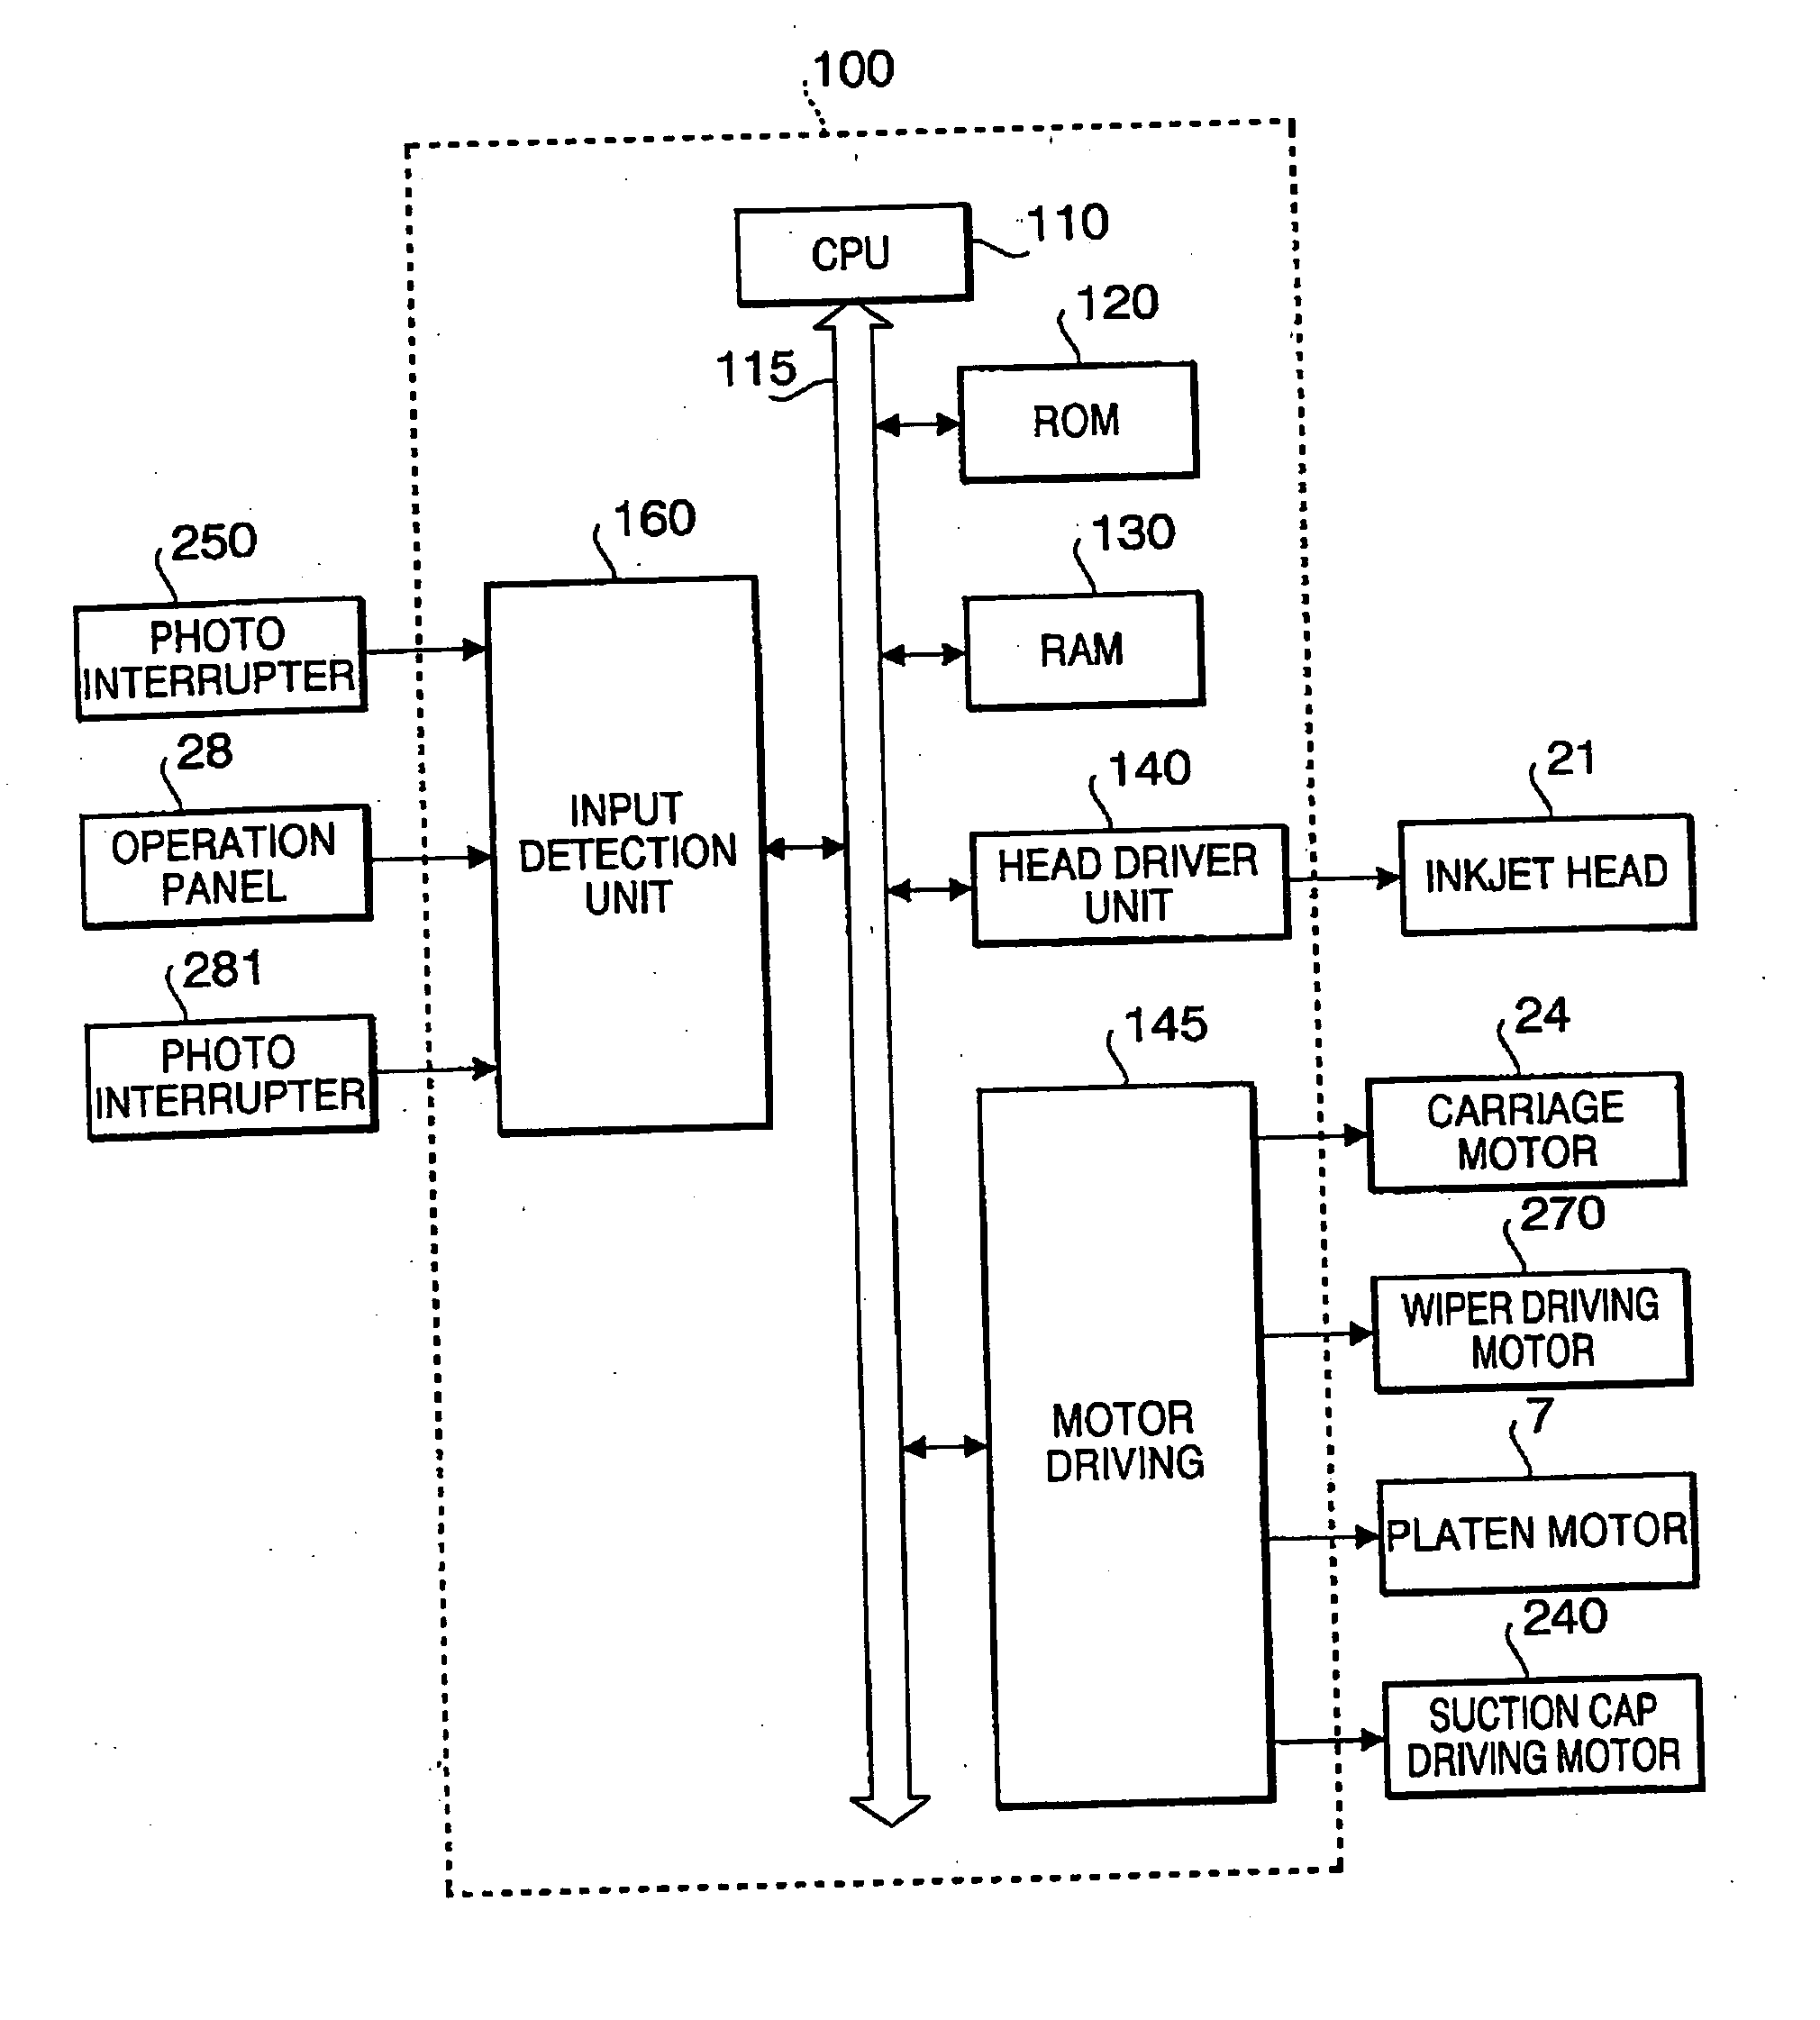 Inkjet printing device, method and computer program product for controlling ejection restoring system